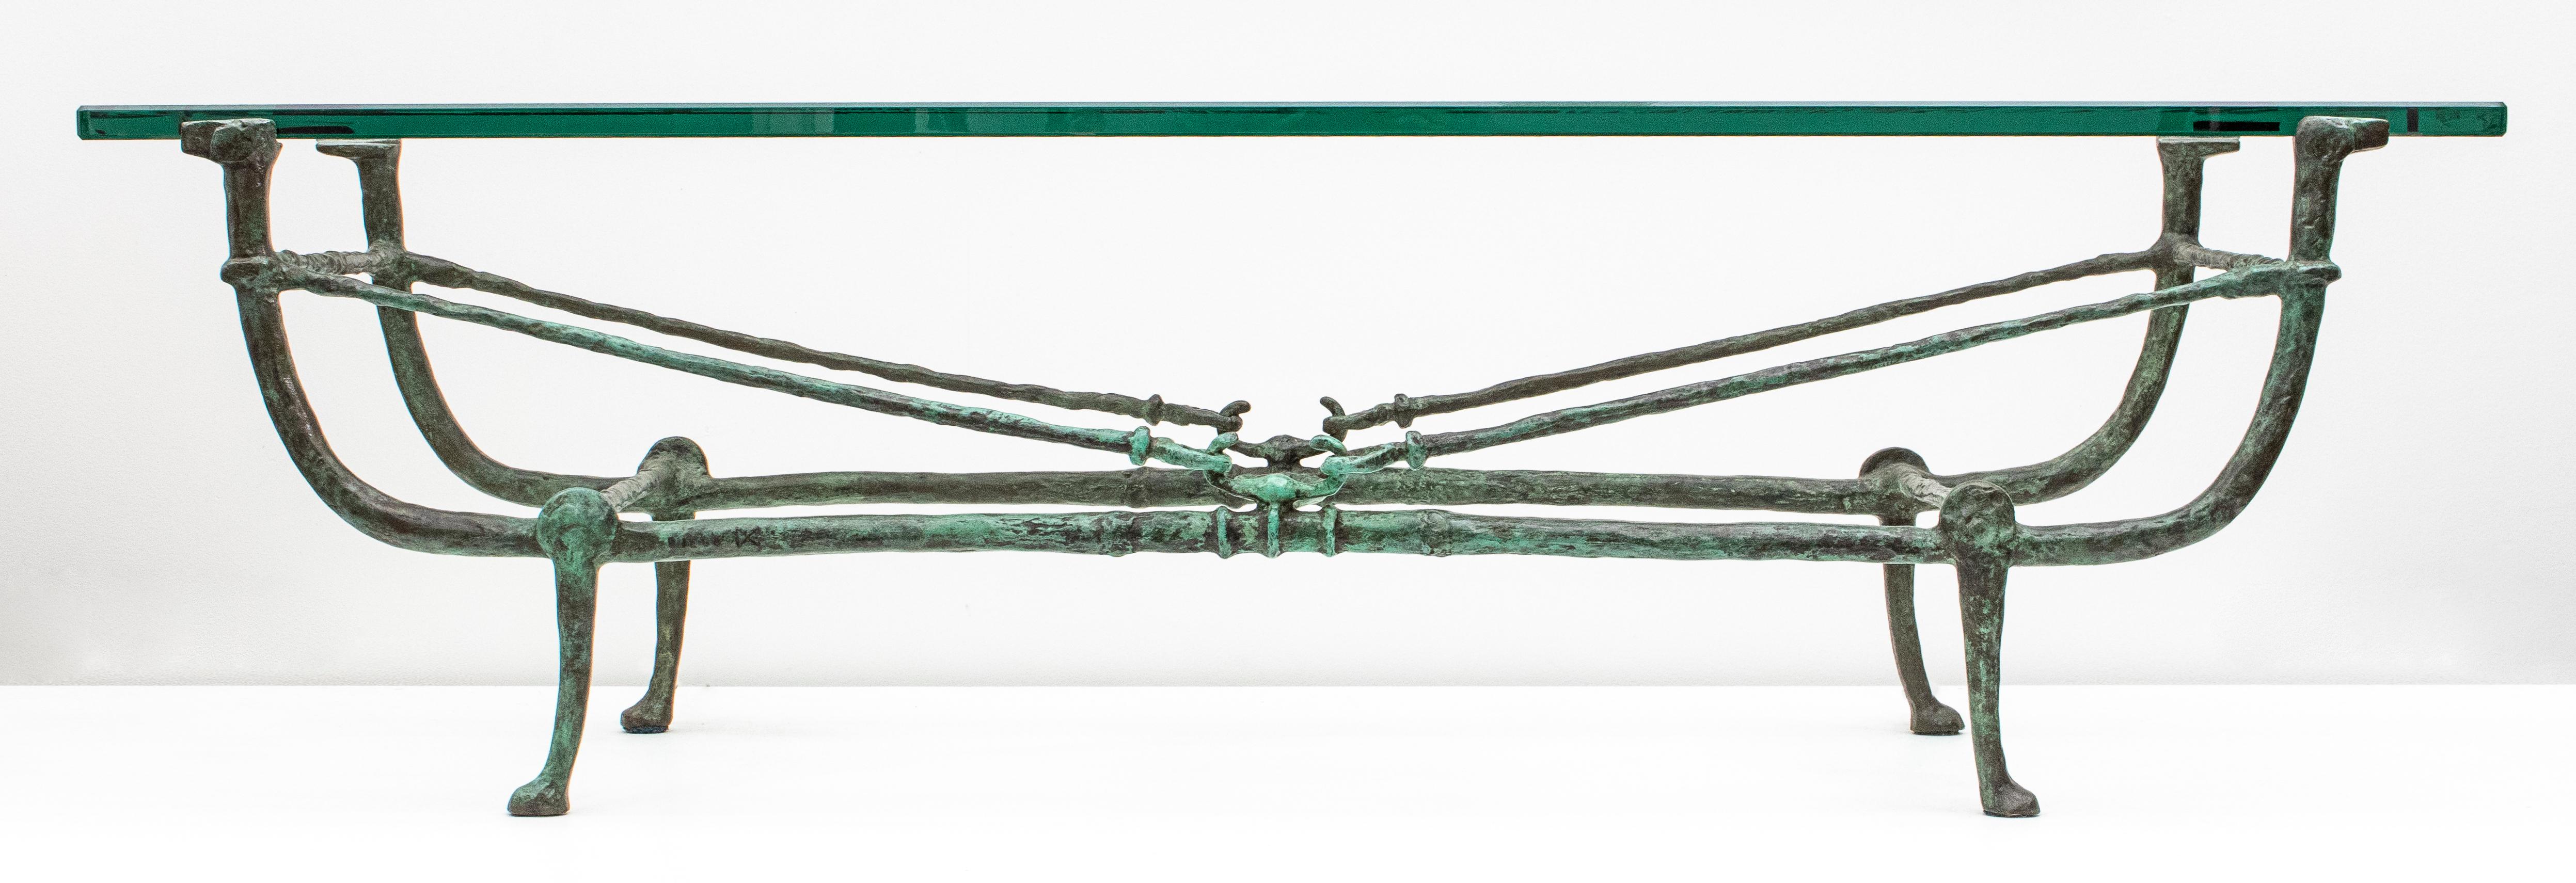 Diego Giacometti (Swiss, 1902-1985), 'Table berceau,' seconde version, low table, patinated bronze and glass, designed circa 1965, stamped signature: 